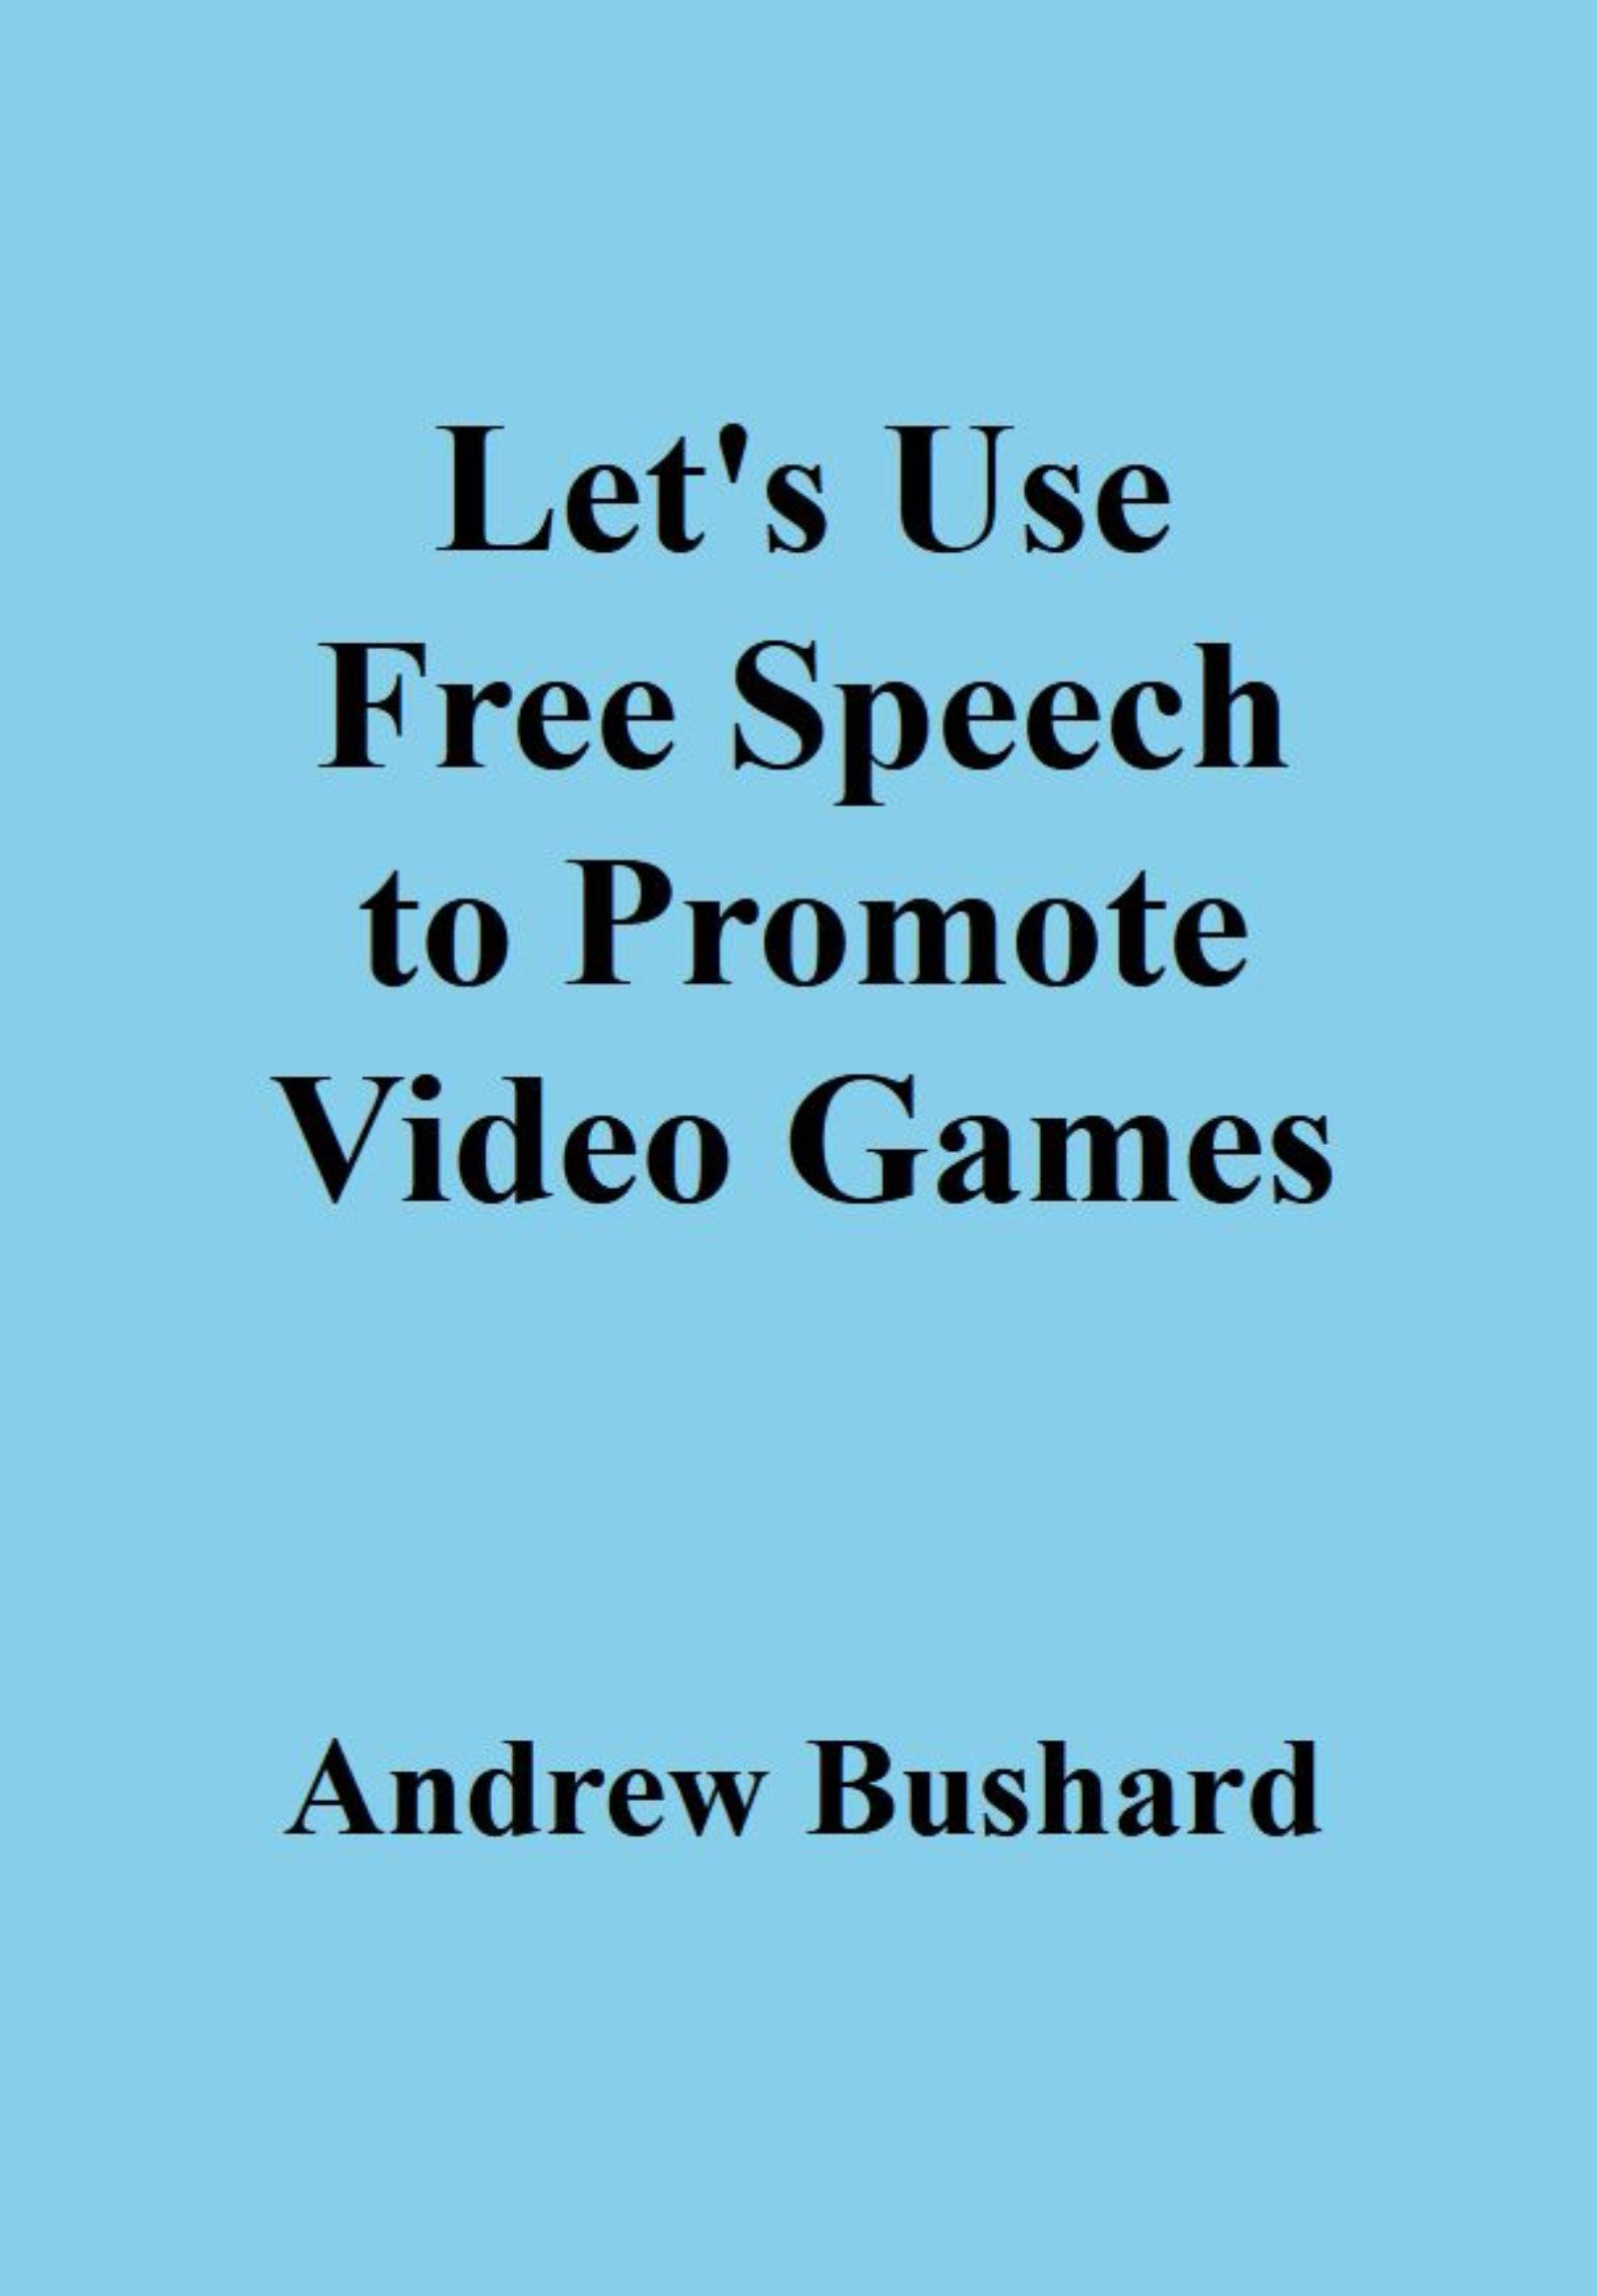 Let's Use Free Speech to Promote Video Games